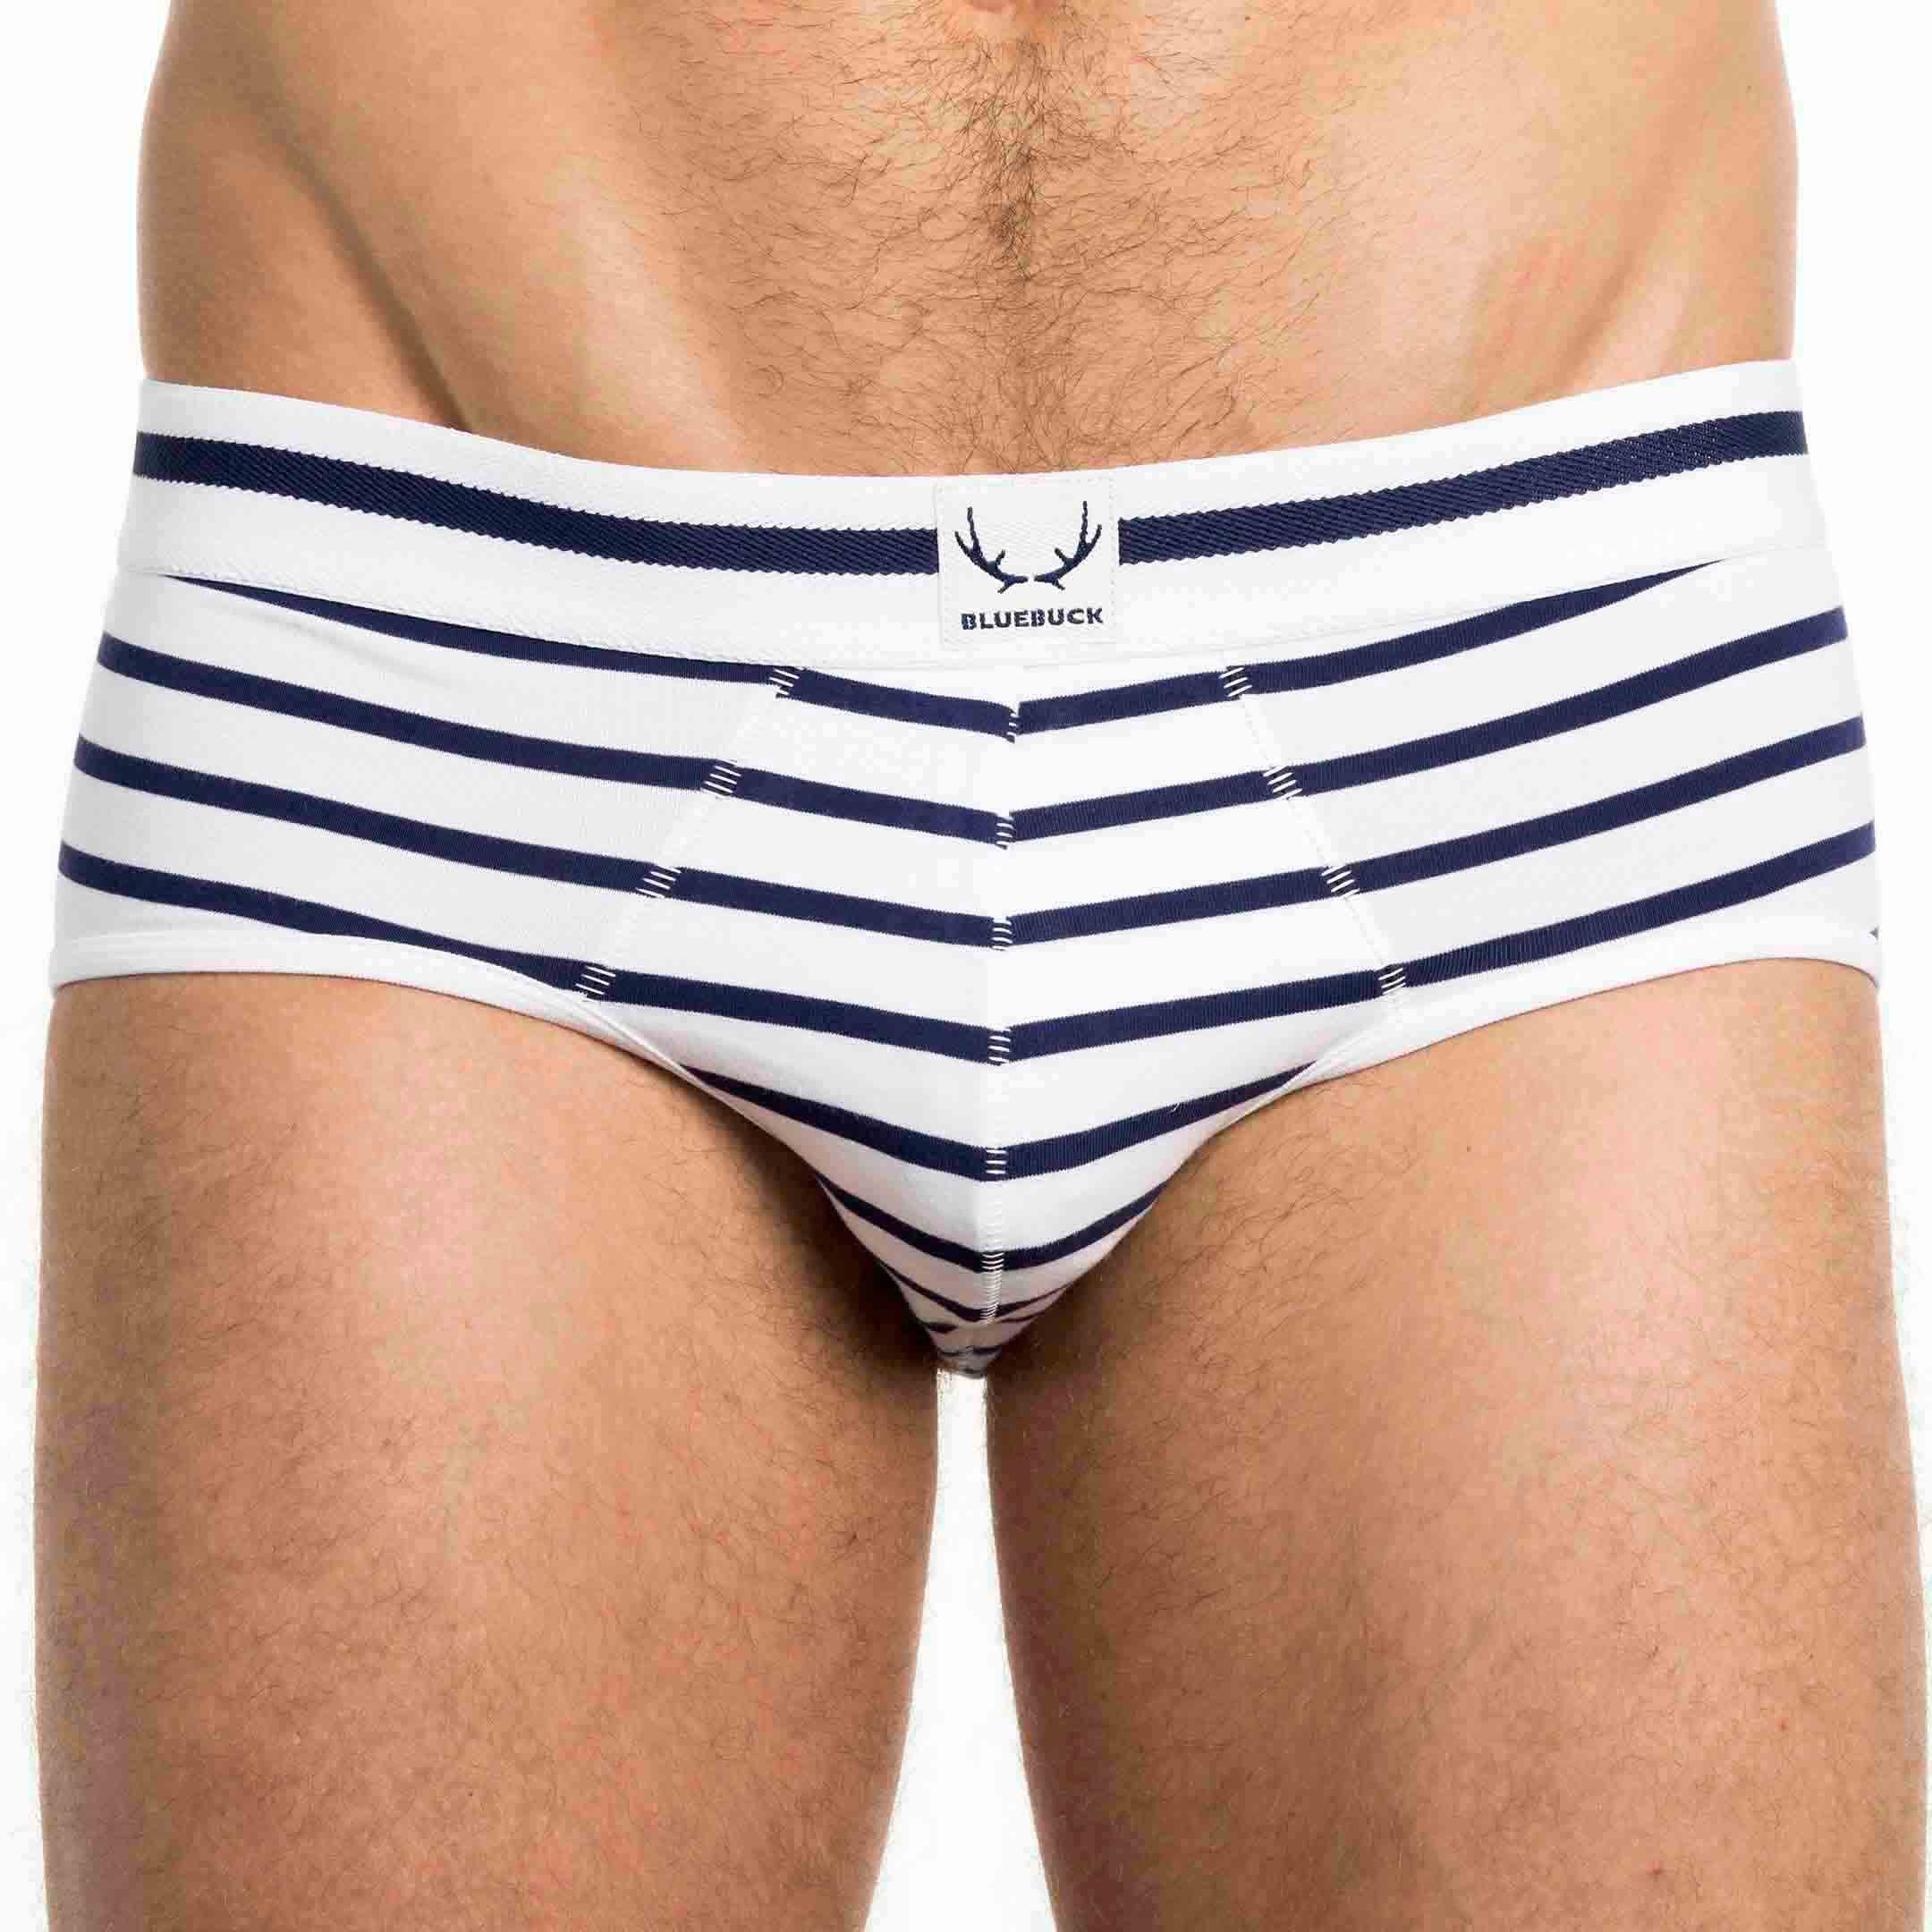 Colorful striped underpants made of organic cotton from Bluebuck